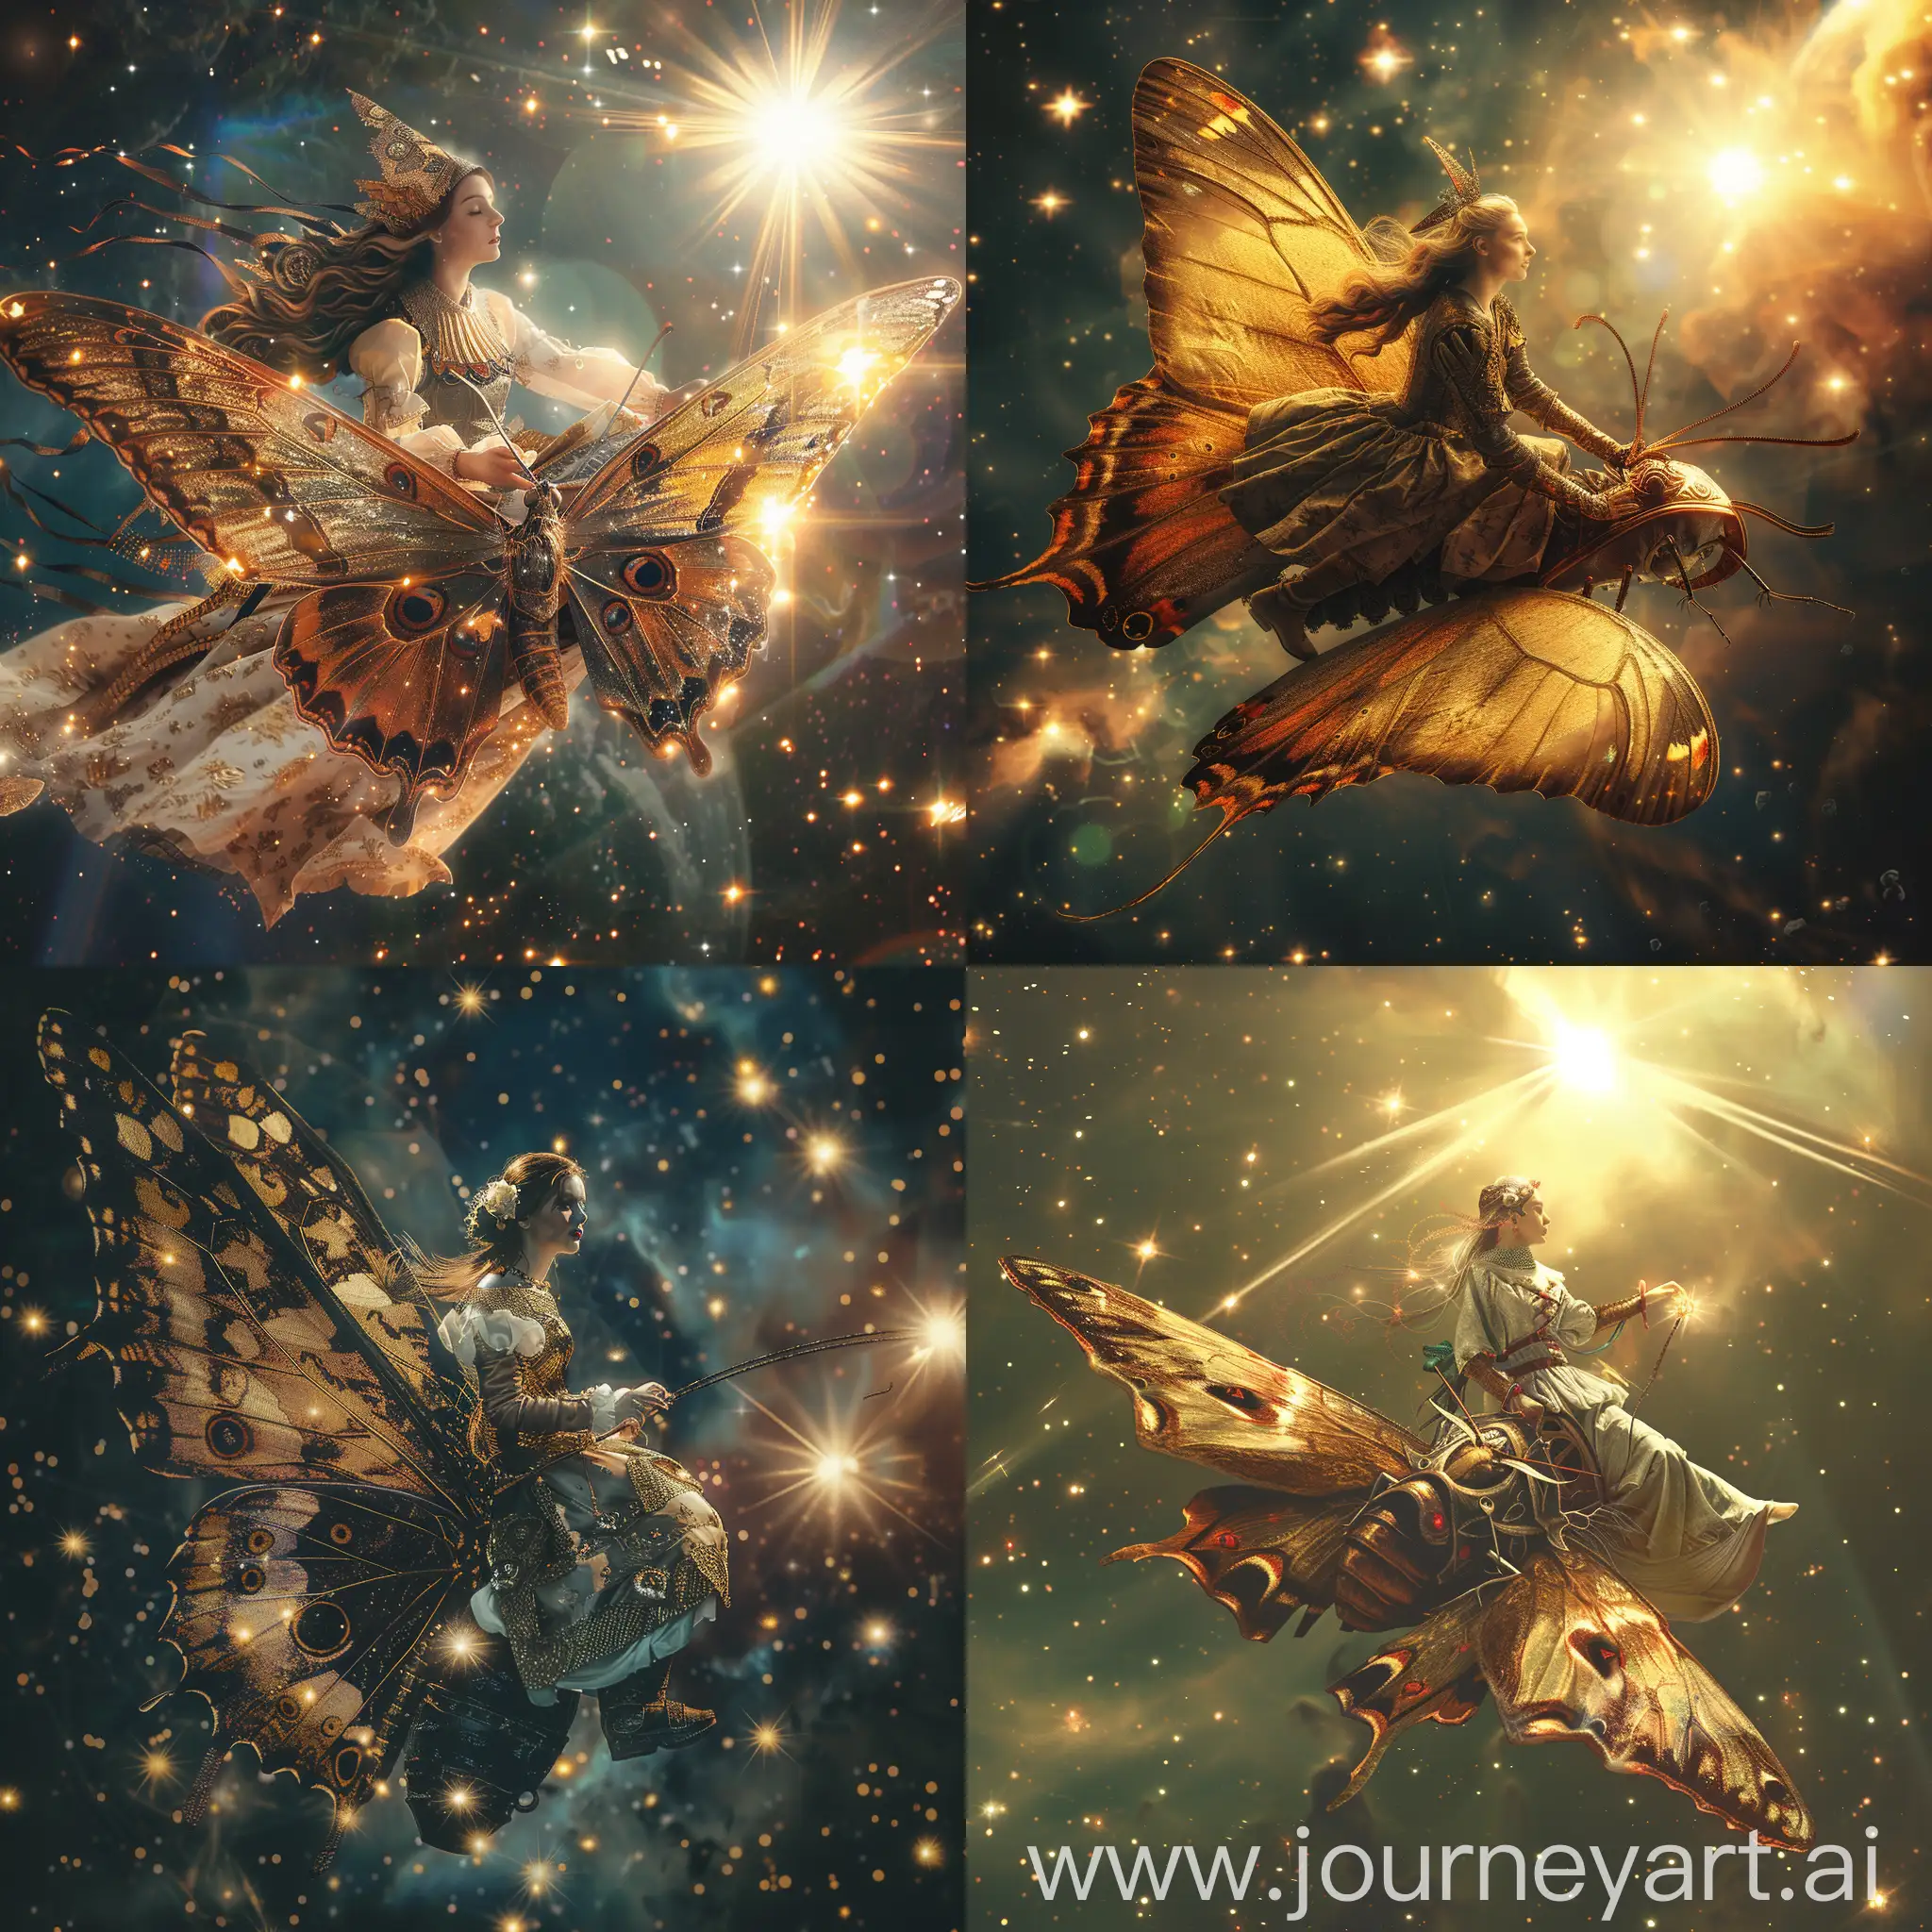 Medieval-Woman-Riding-Giant-Butterfly-Through-Outer-Space